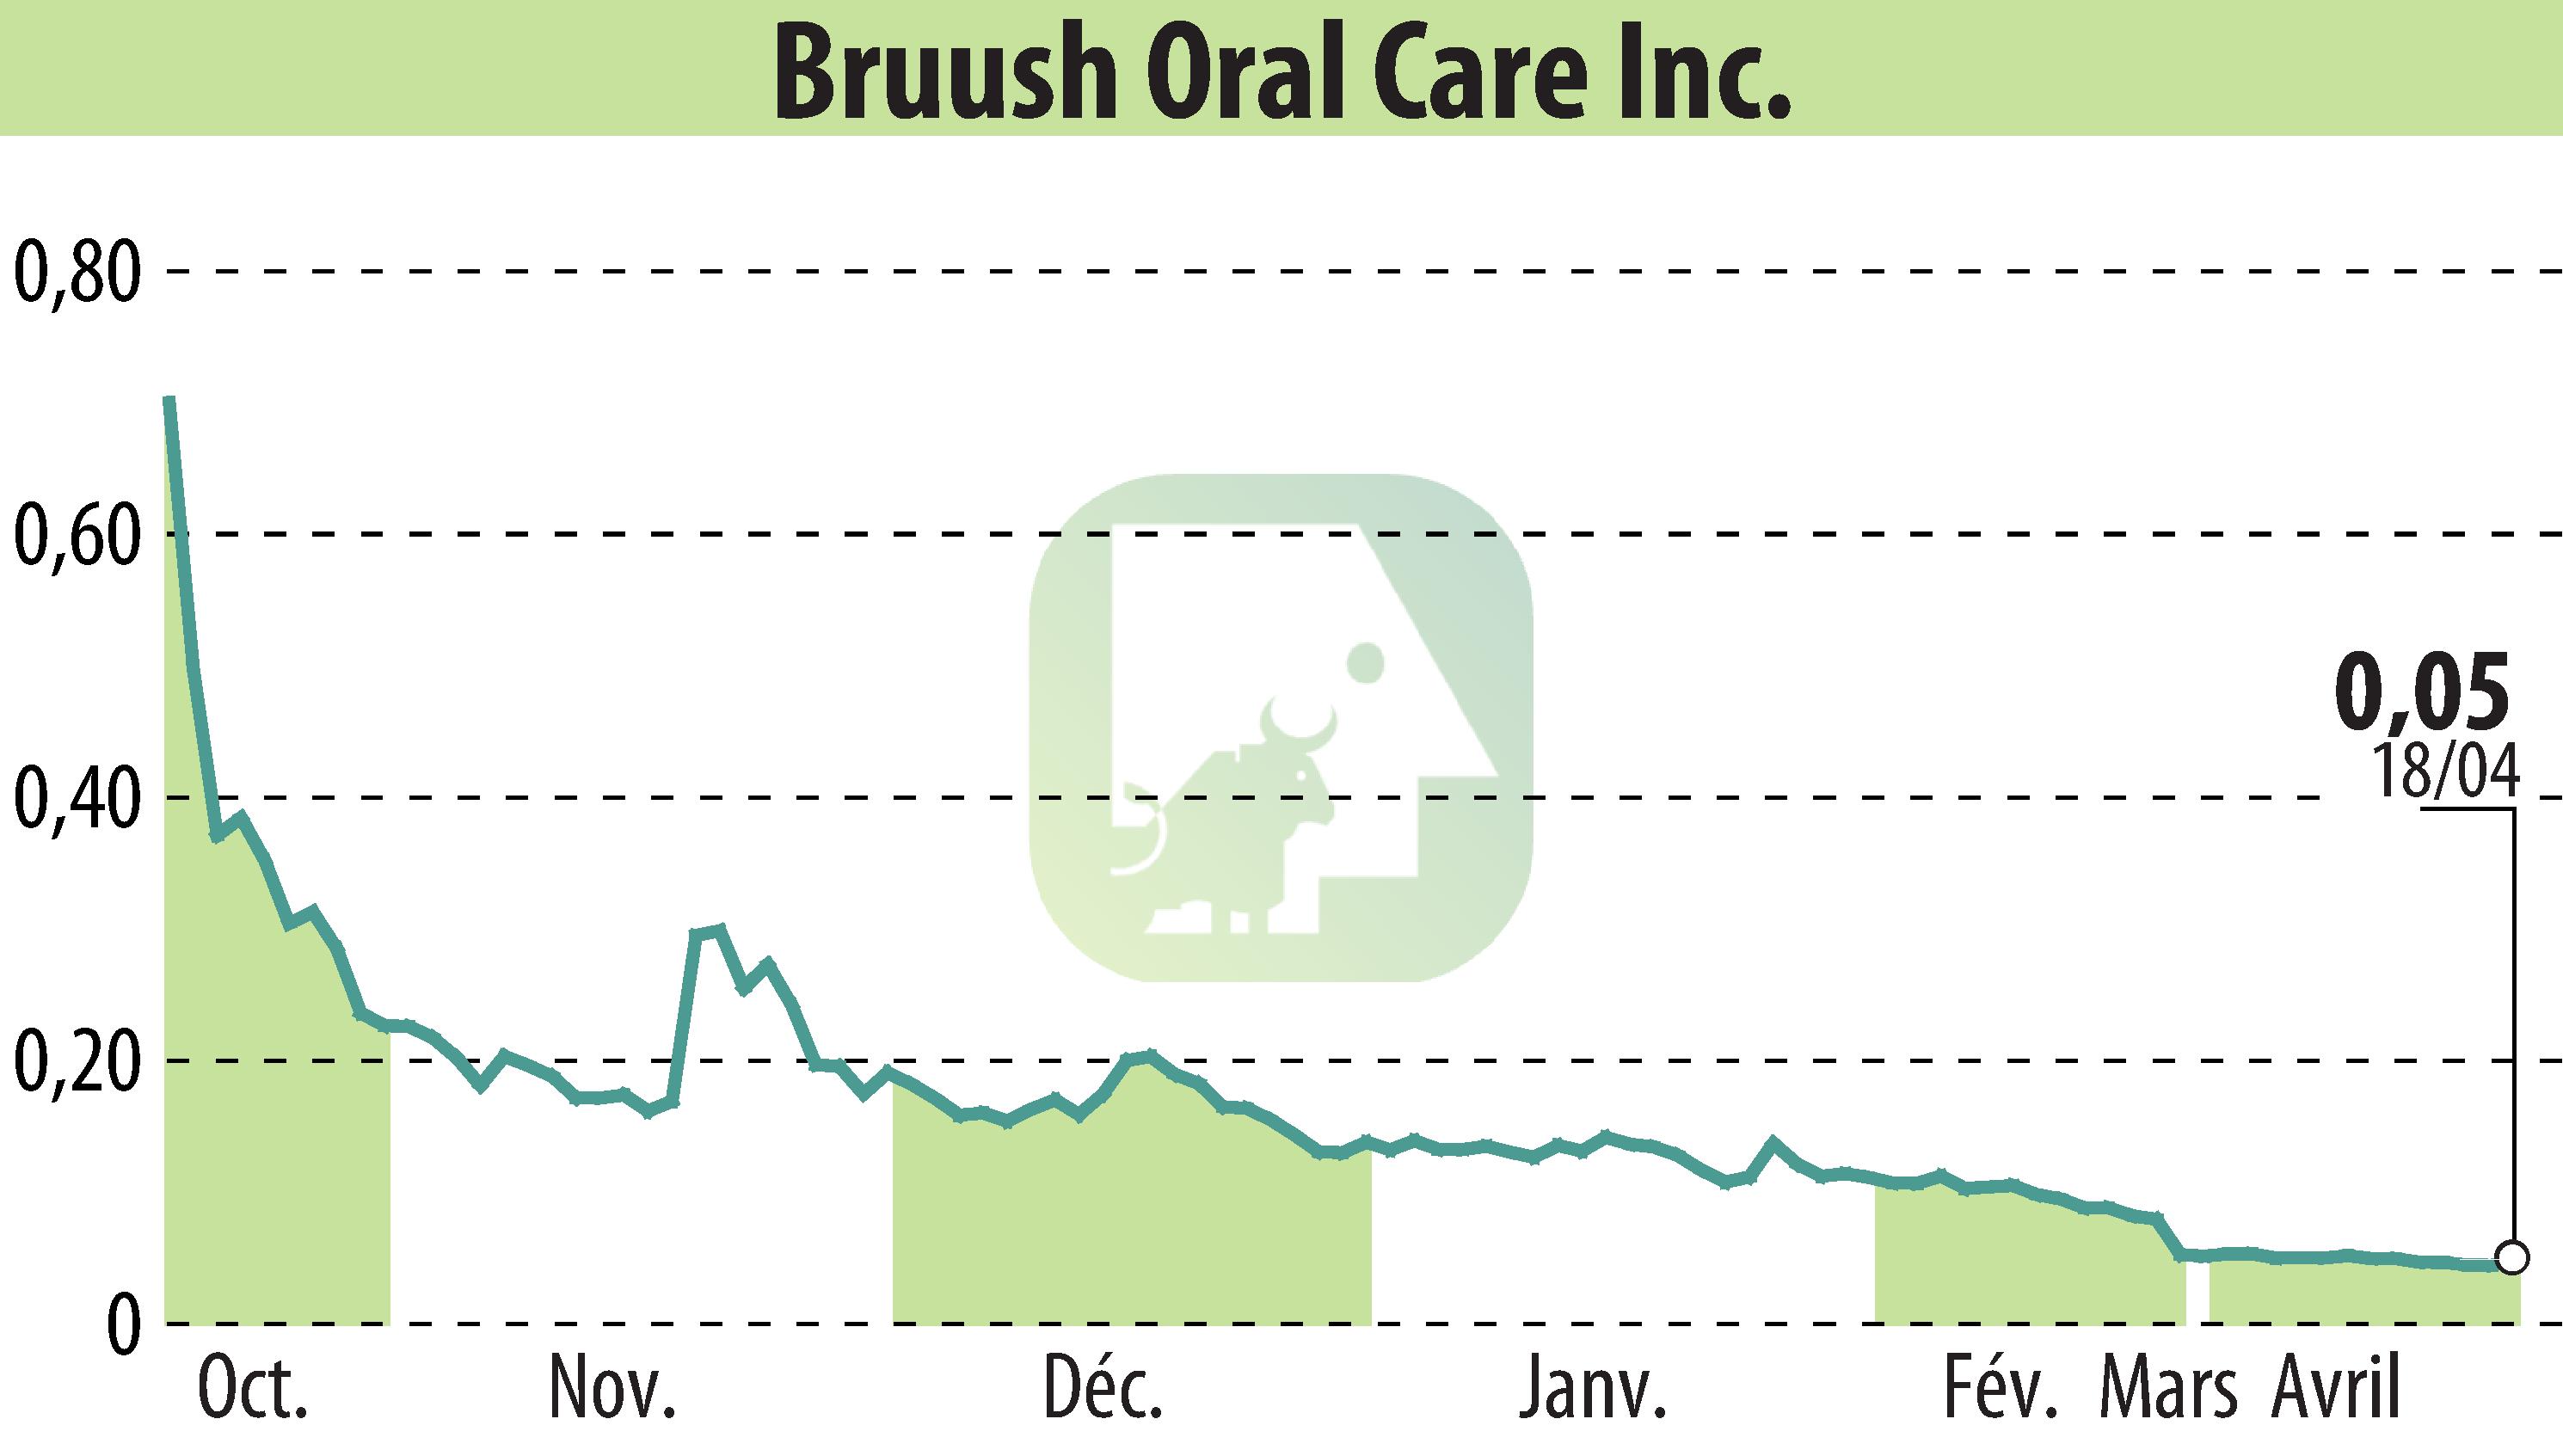 Stock price chart of Bruush Oral Care Inc. (EBR:BRSH) showing fluctuations.